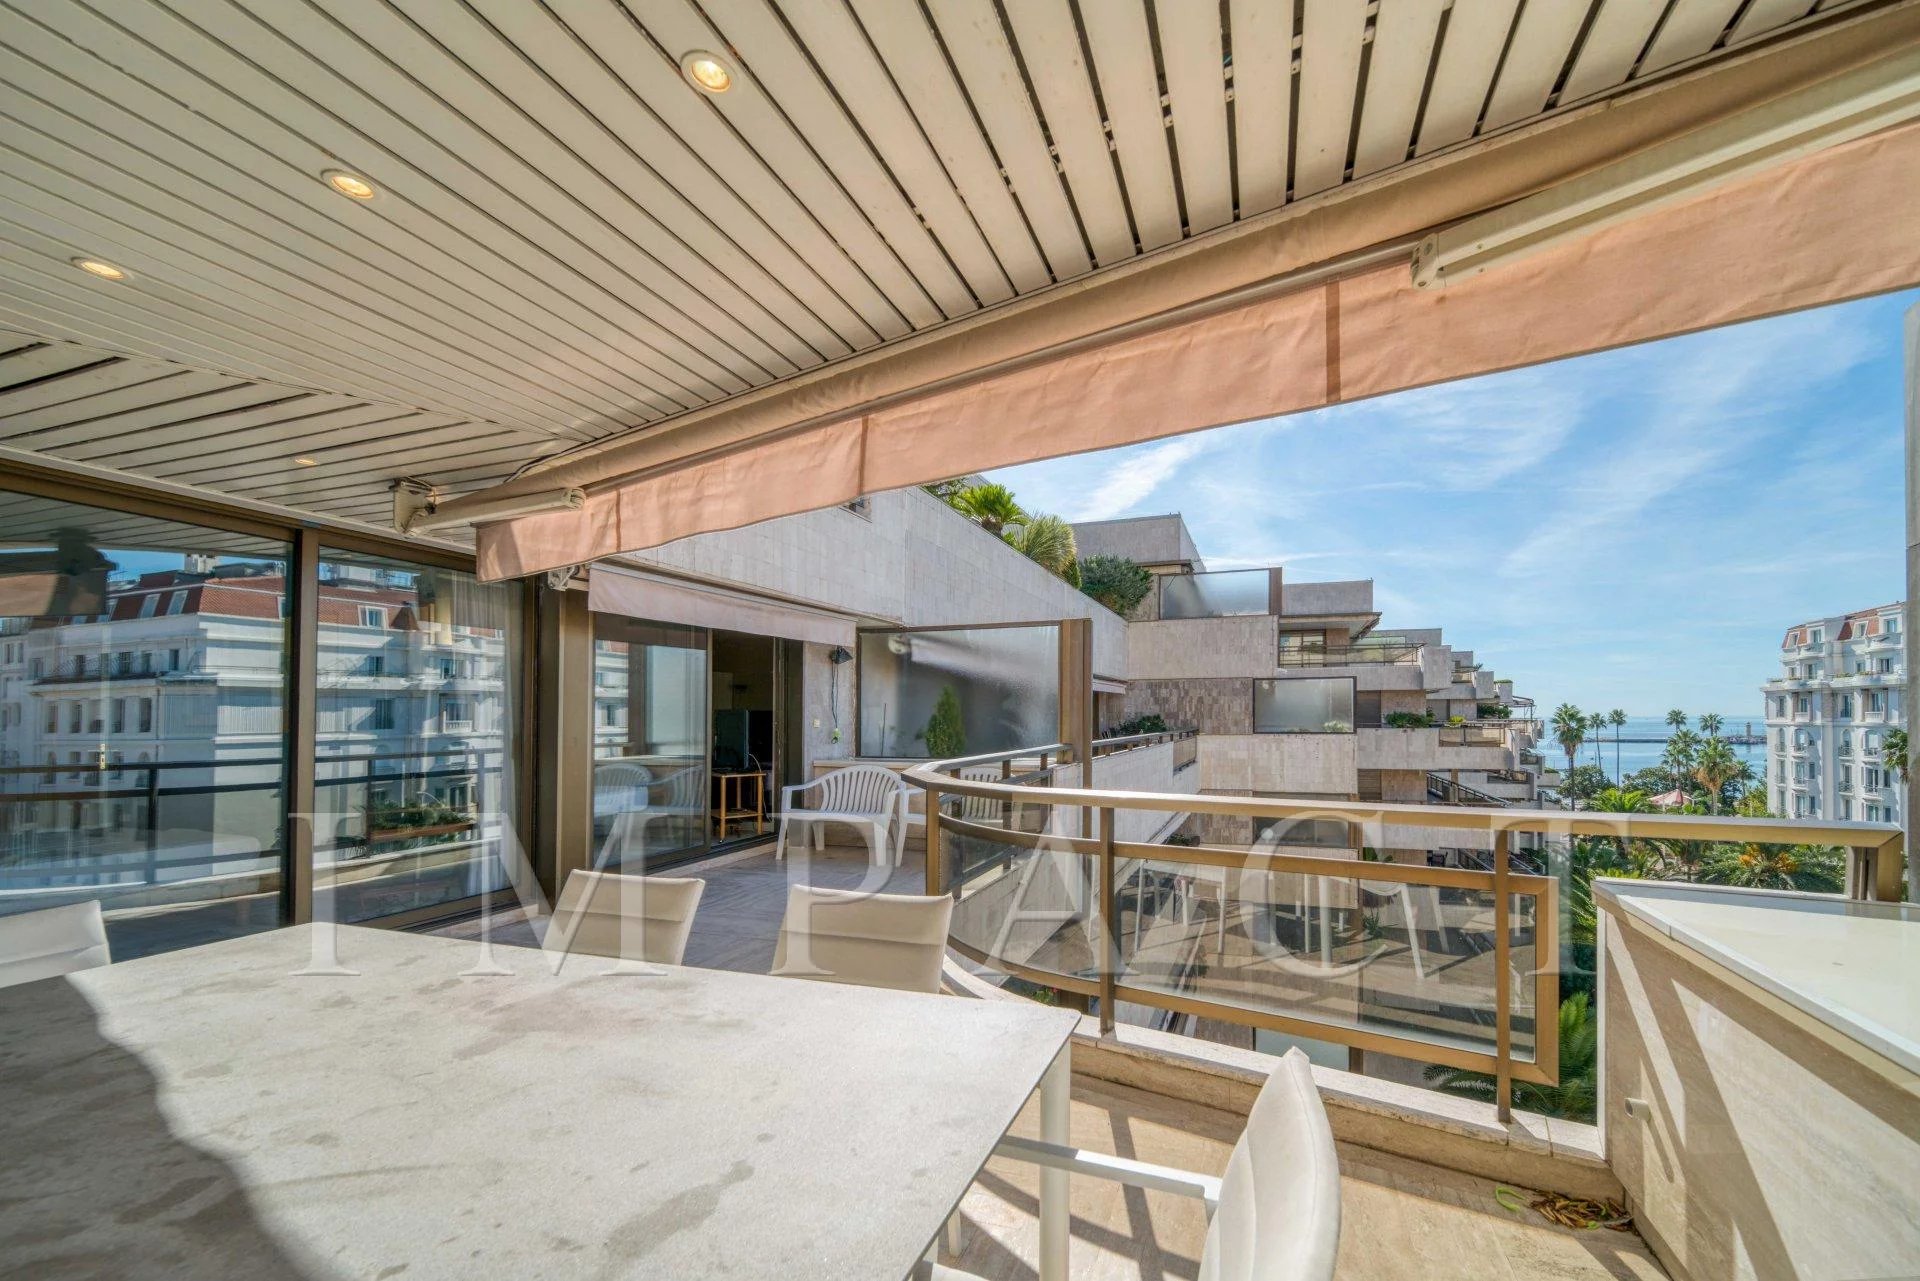 Rental Cannes, Apartment with a spacious terrace 